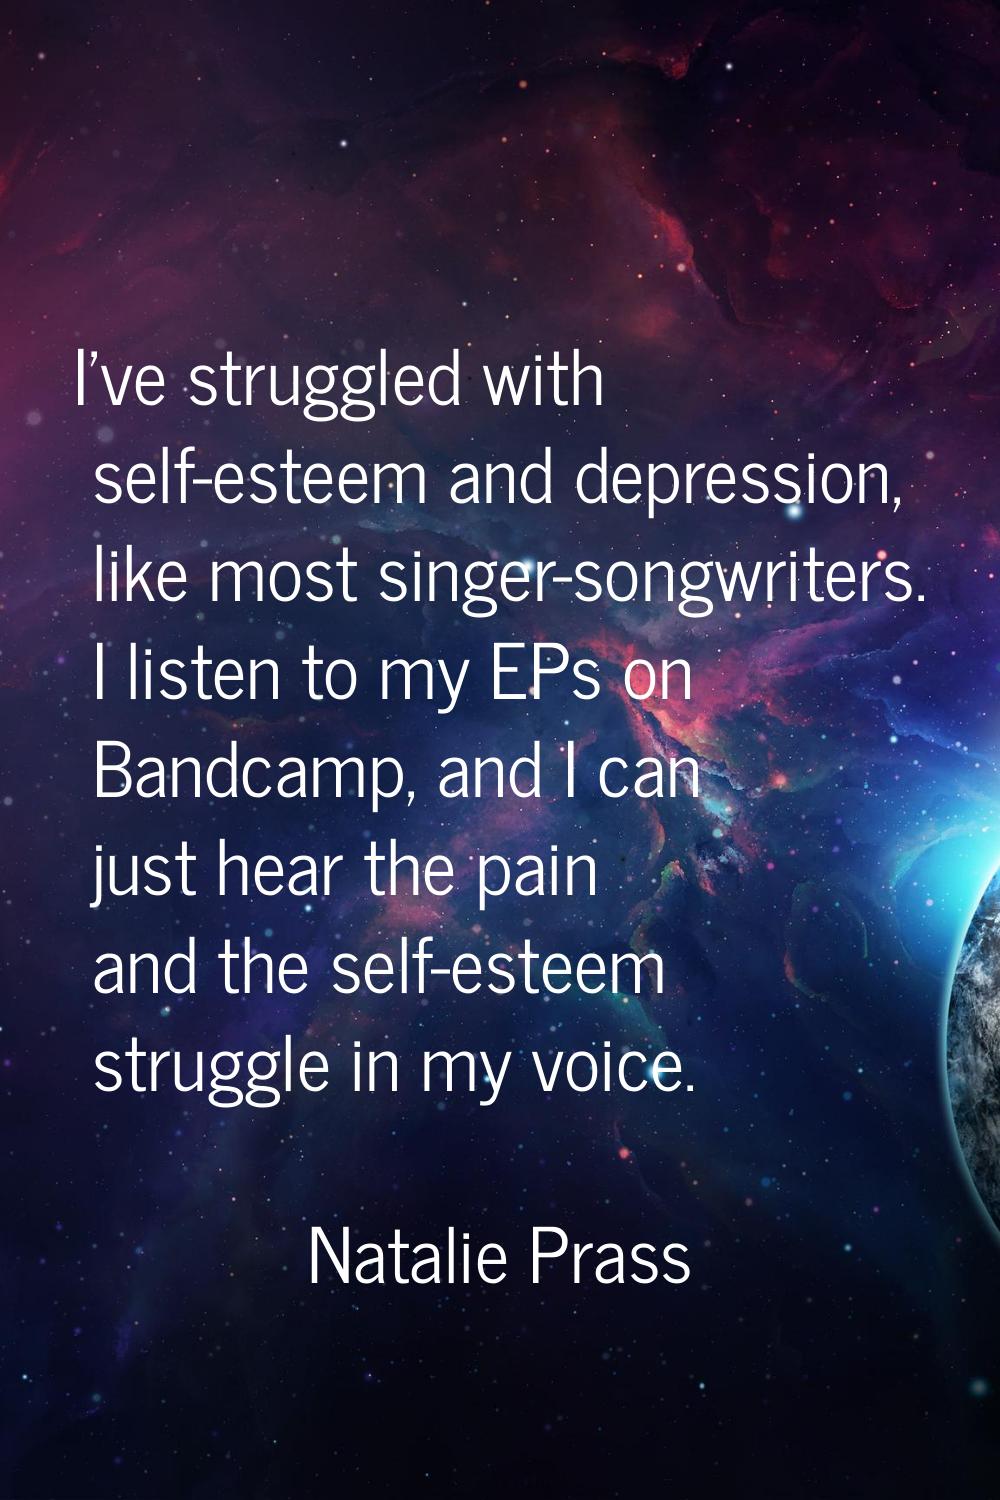 I've struggled with self-esteem and depression, like most singer-songwriters. I listen to my EPs on